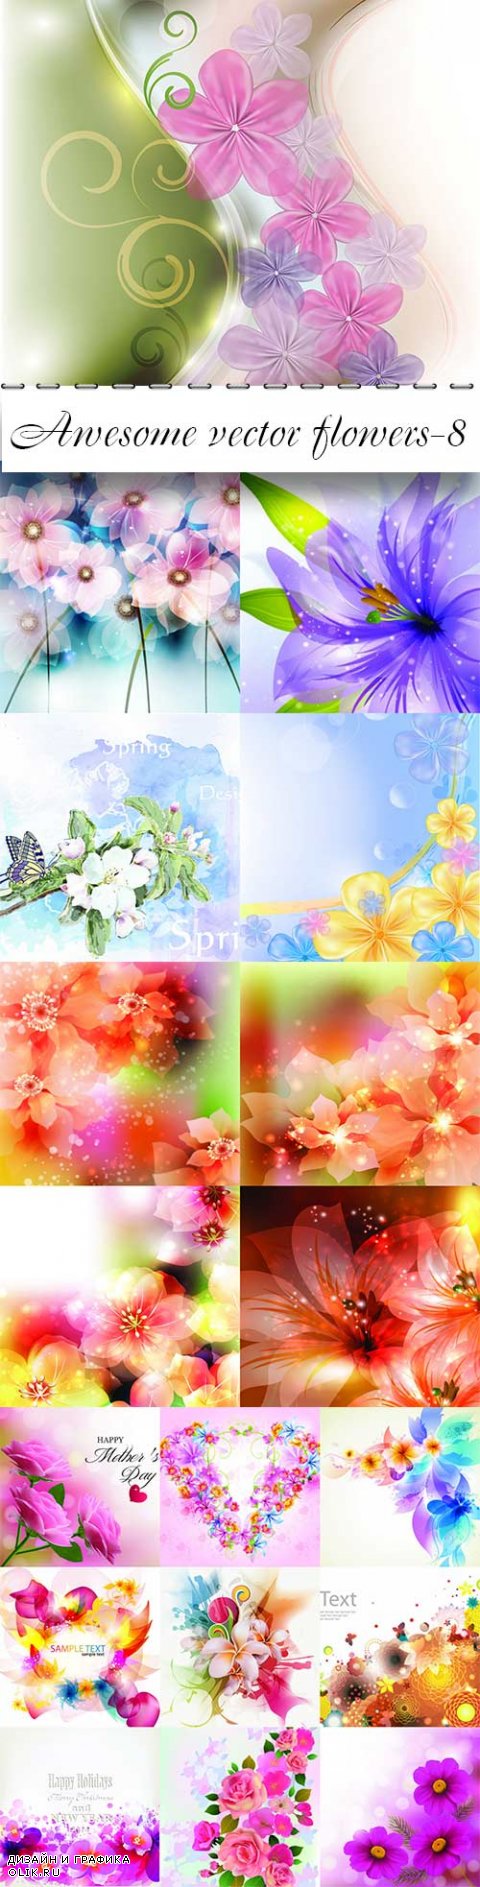 Awesome vector flowers-8